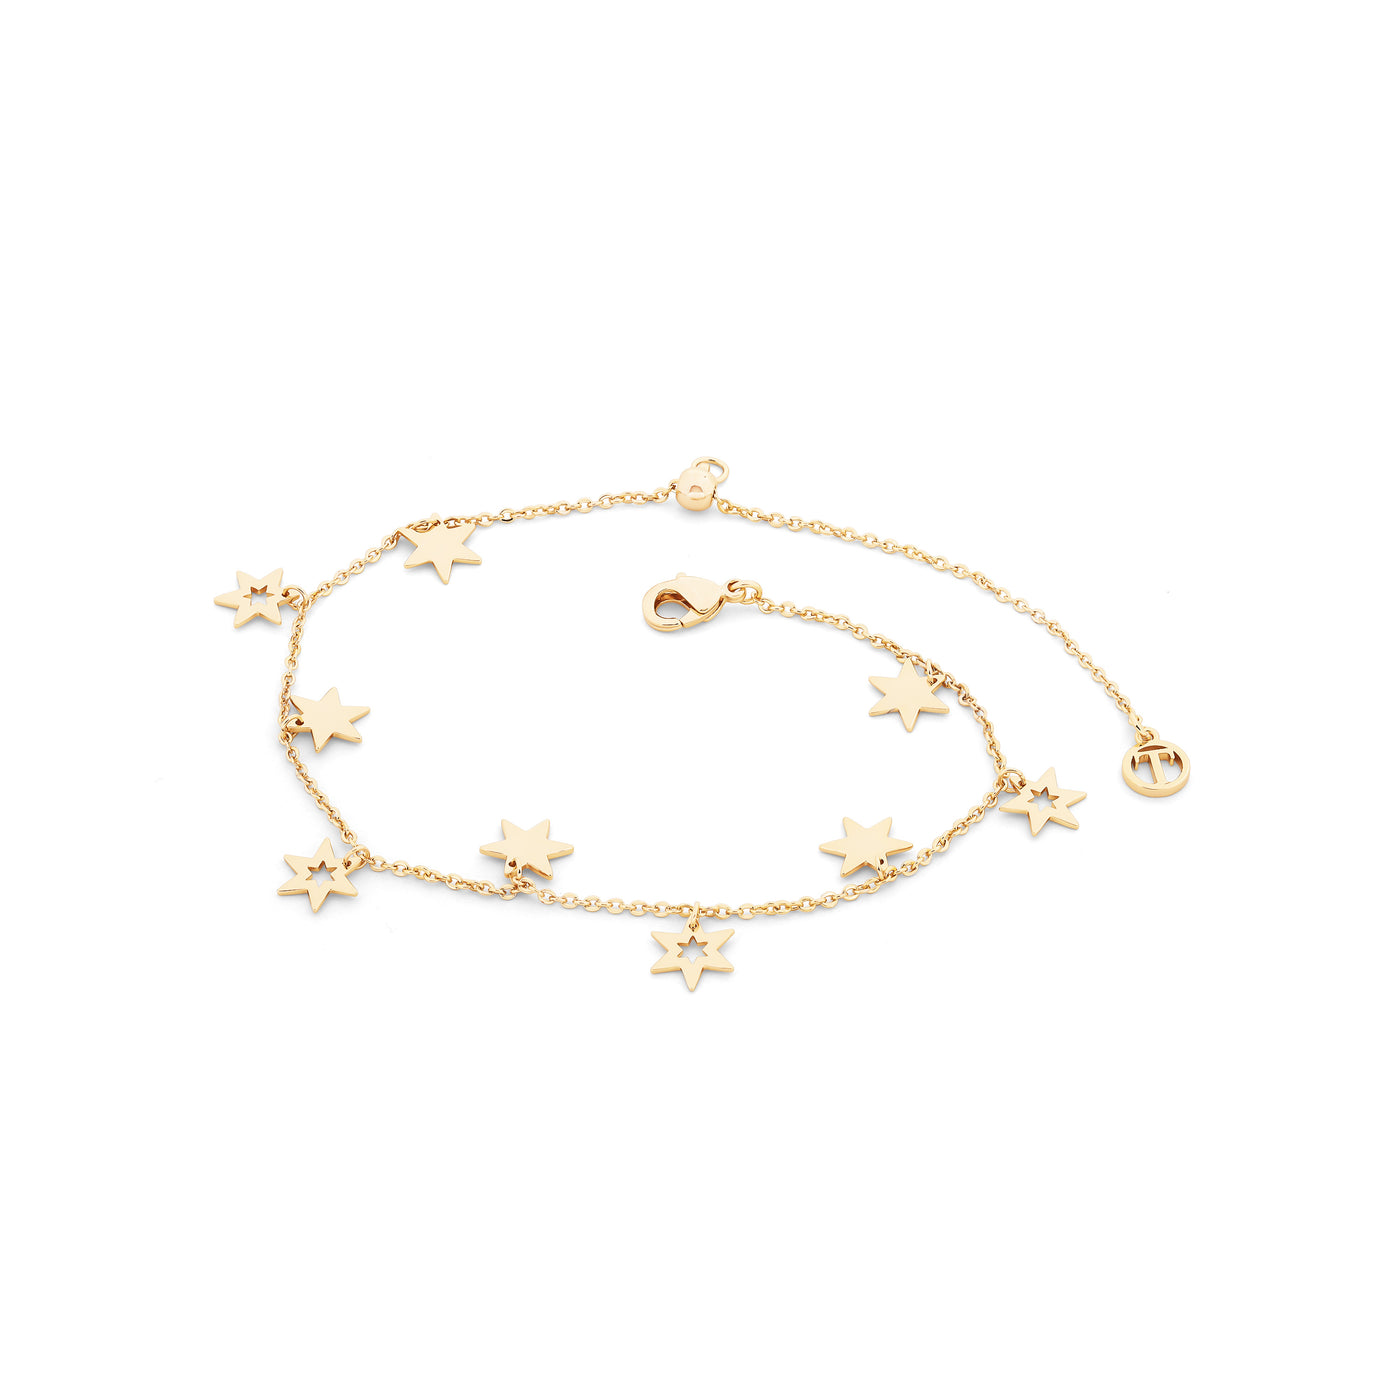 Tipperary Crystal Bracelet - Star Collection - Nine Star Gold